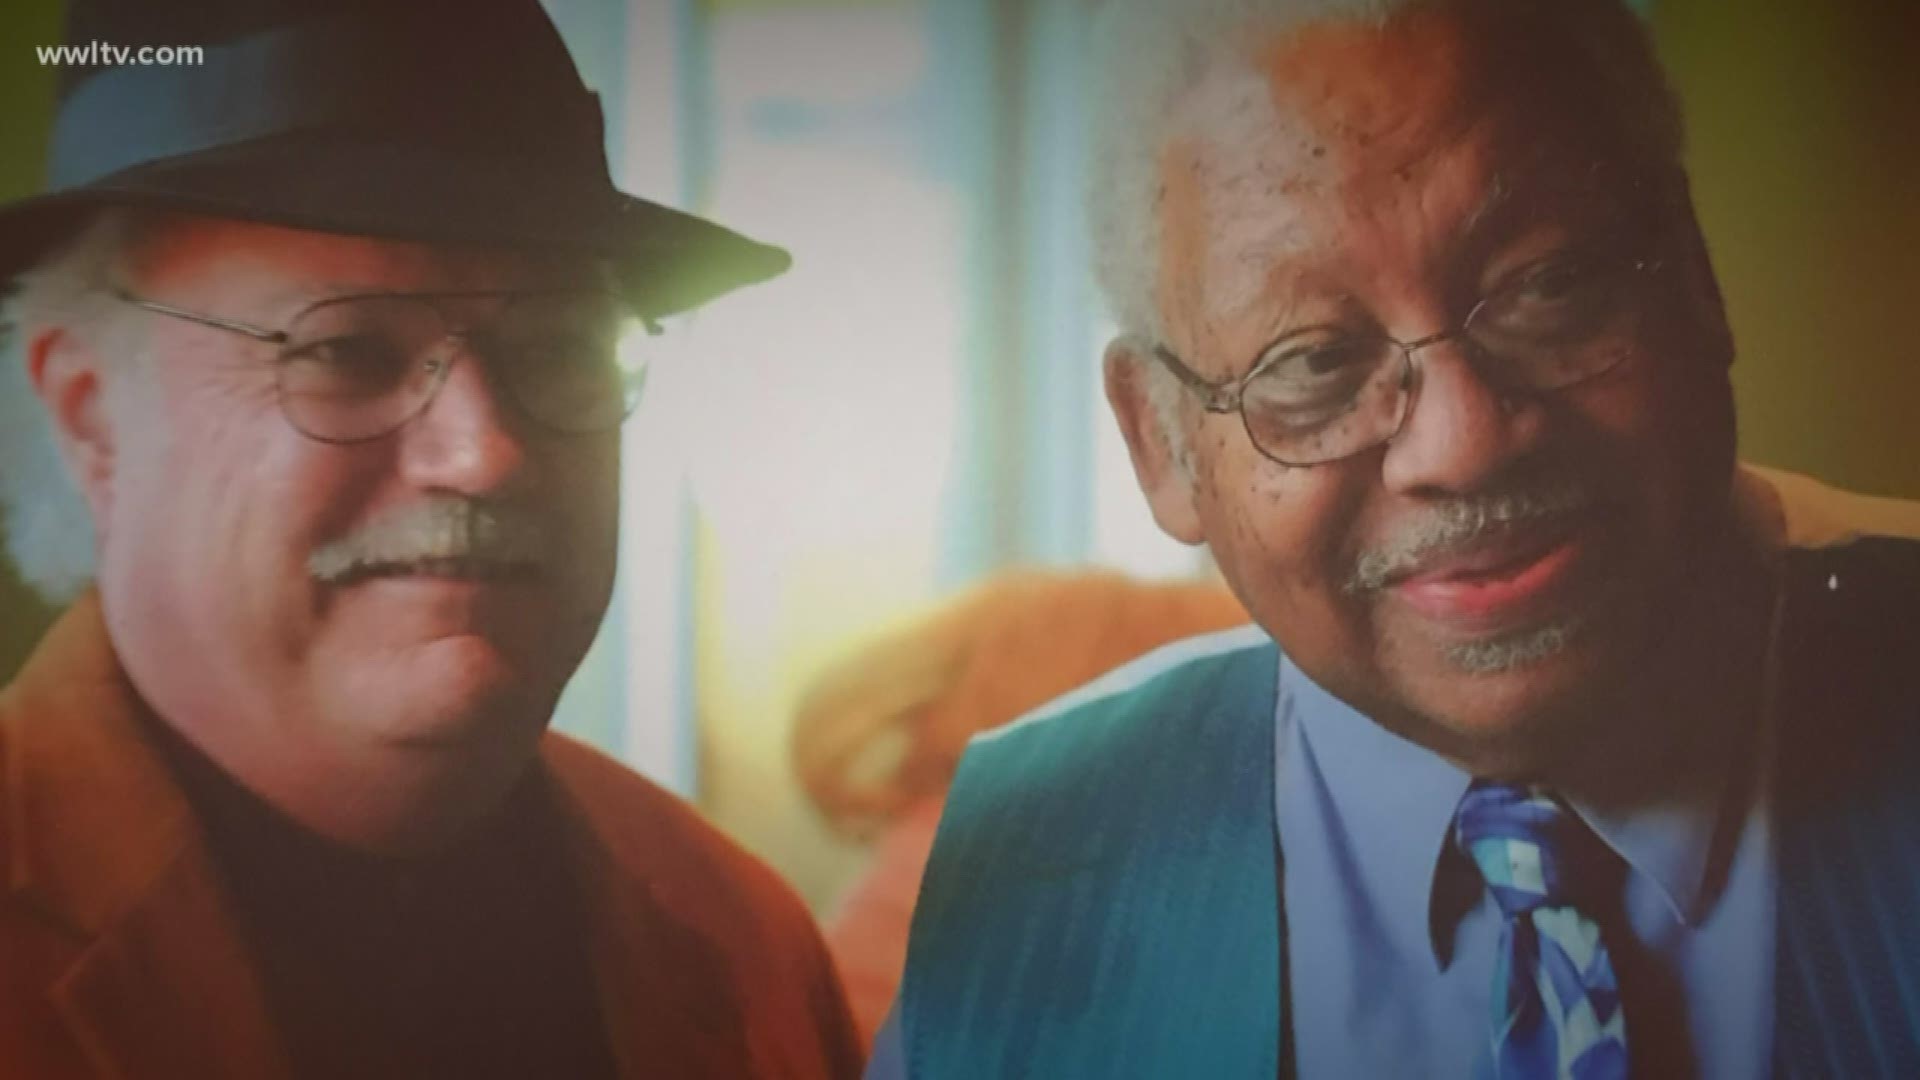 Ellis Marsalis Jr., the patriarch of a New Orleans musical family, known for his brand of modern jazz as well as for educating generations of musicians as a teacher,